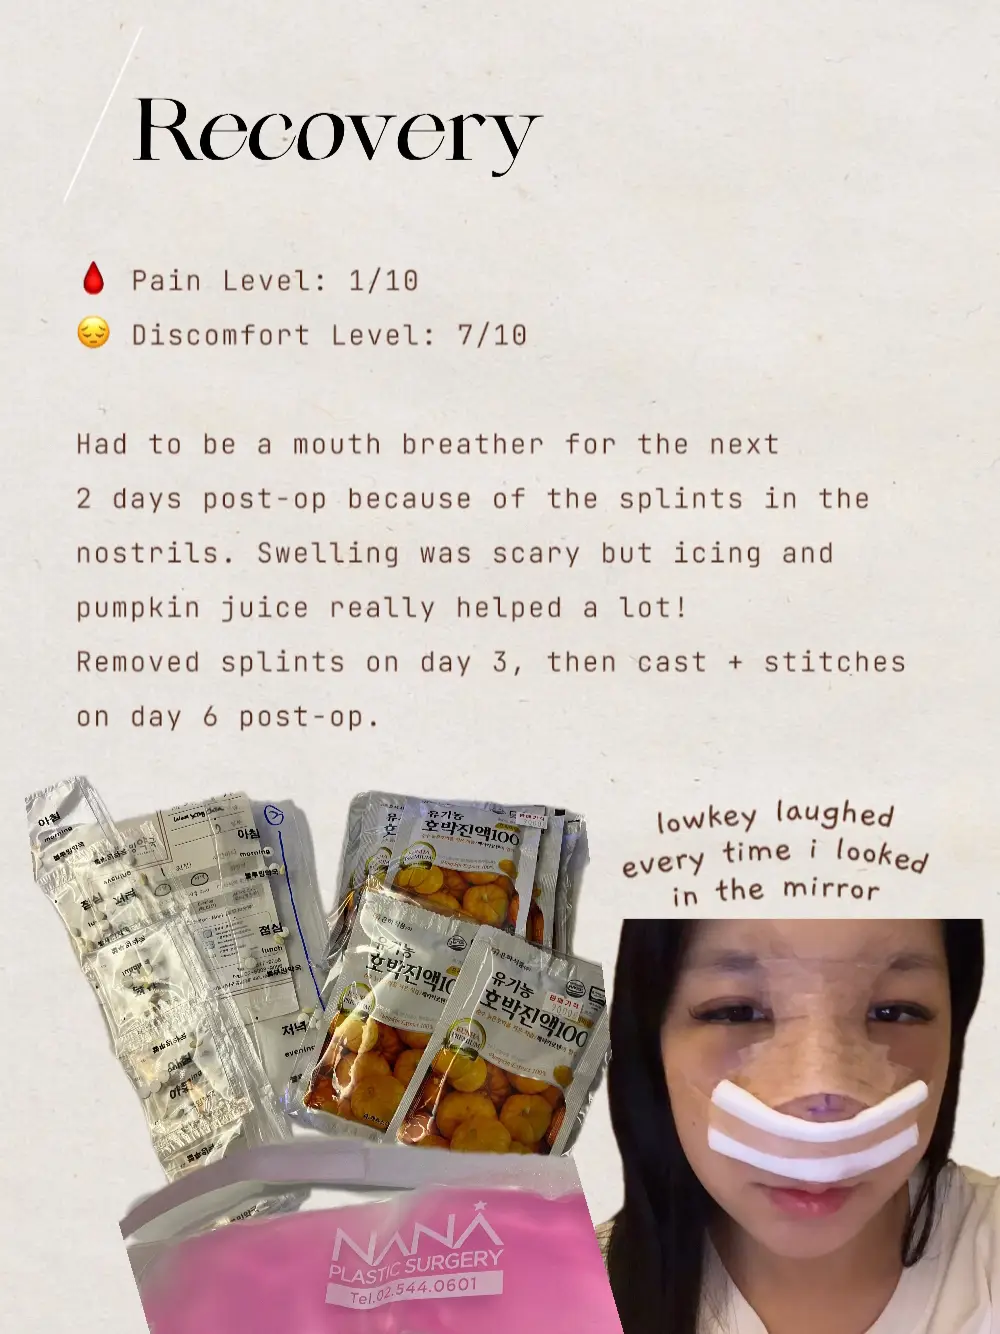 Got a nose job in Korea 🤕 (Price + Recovery!)'s images(3)